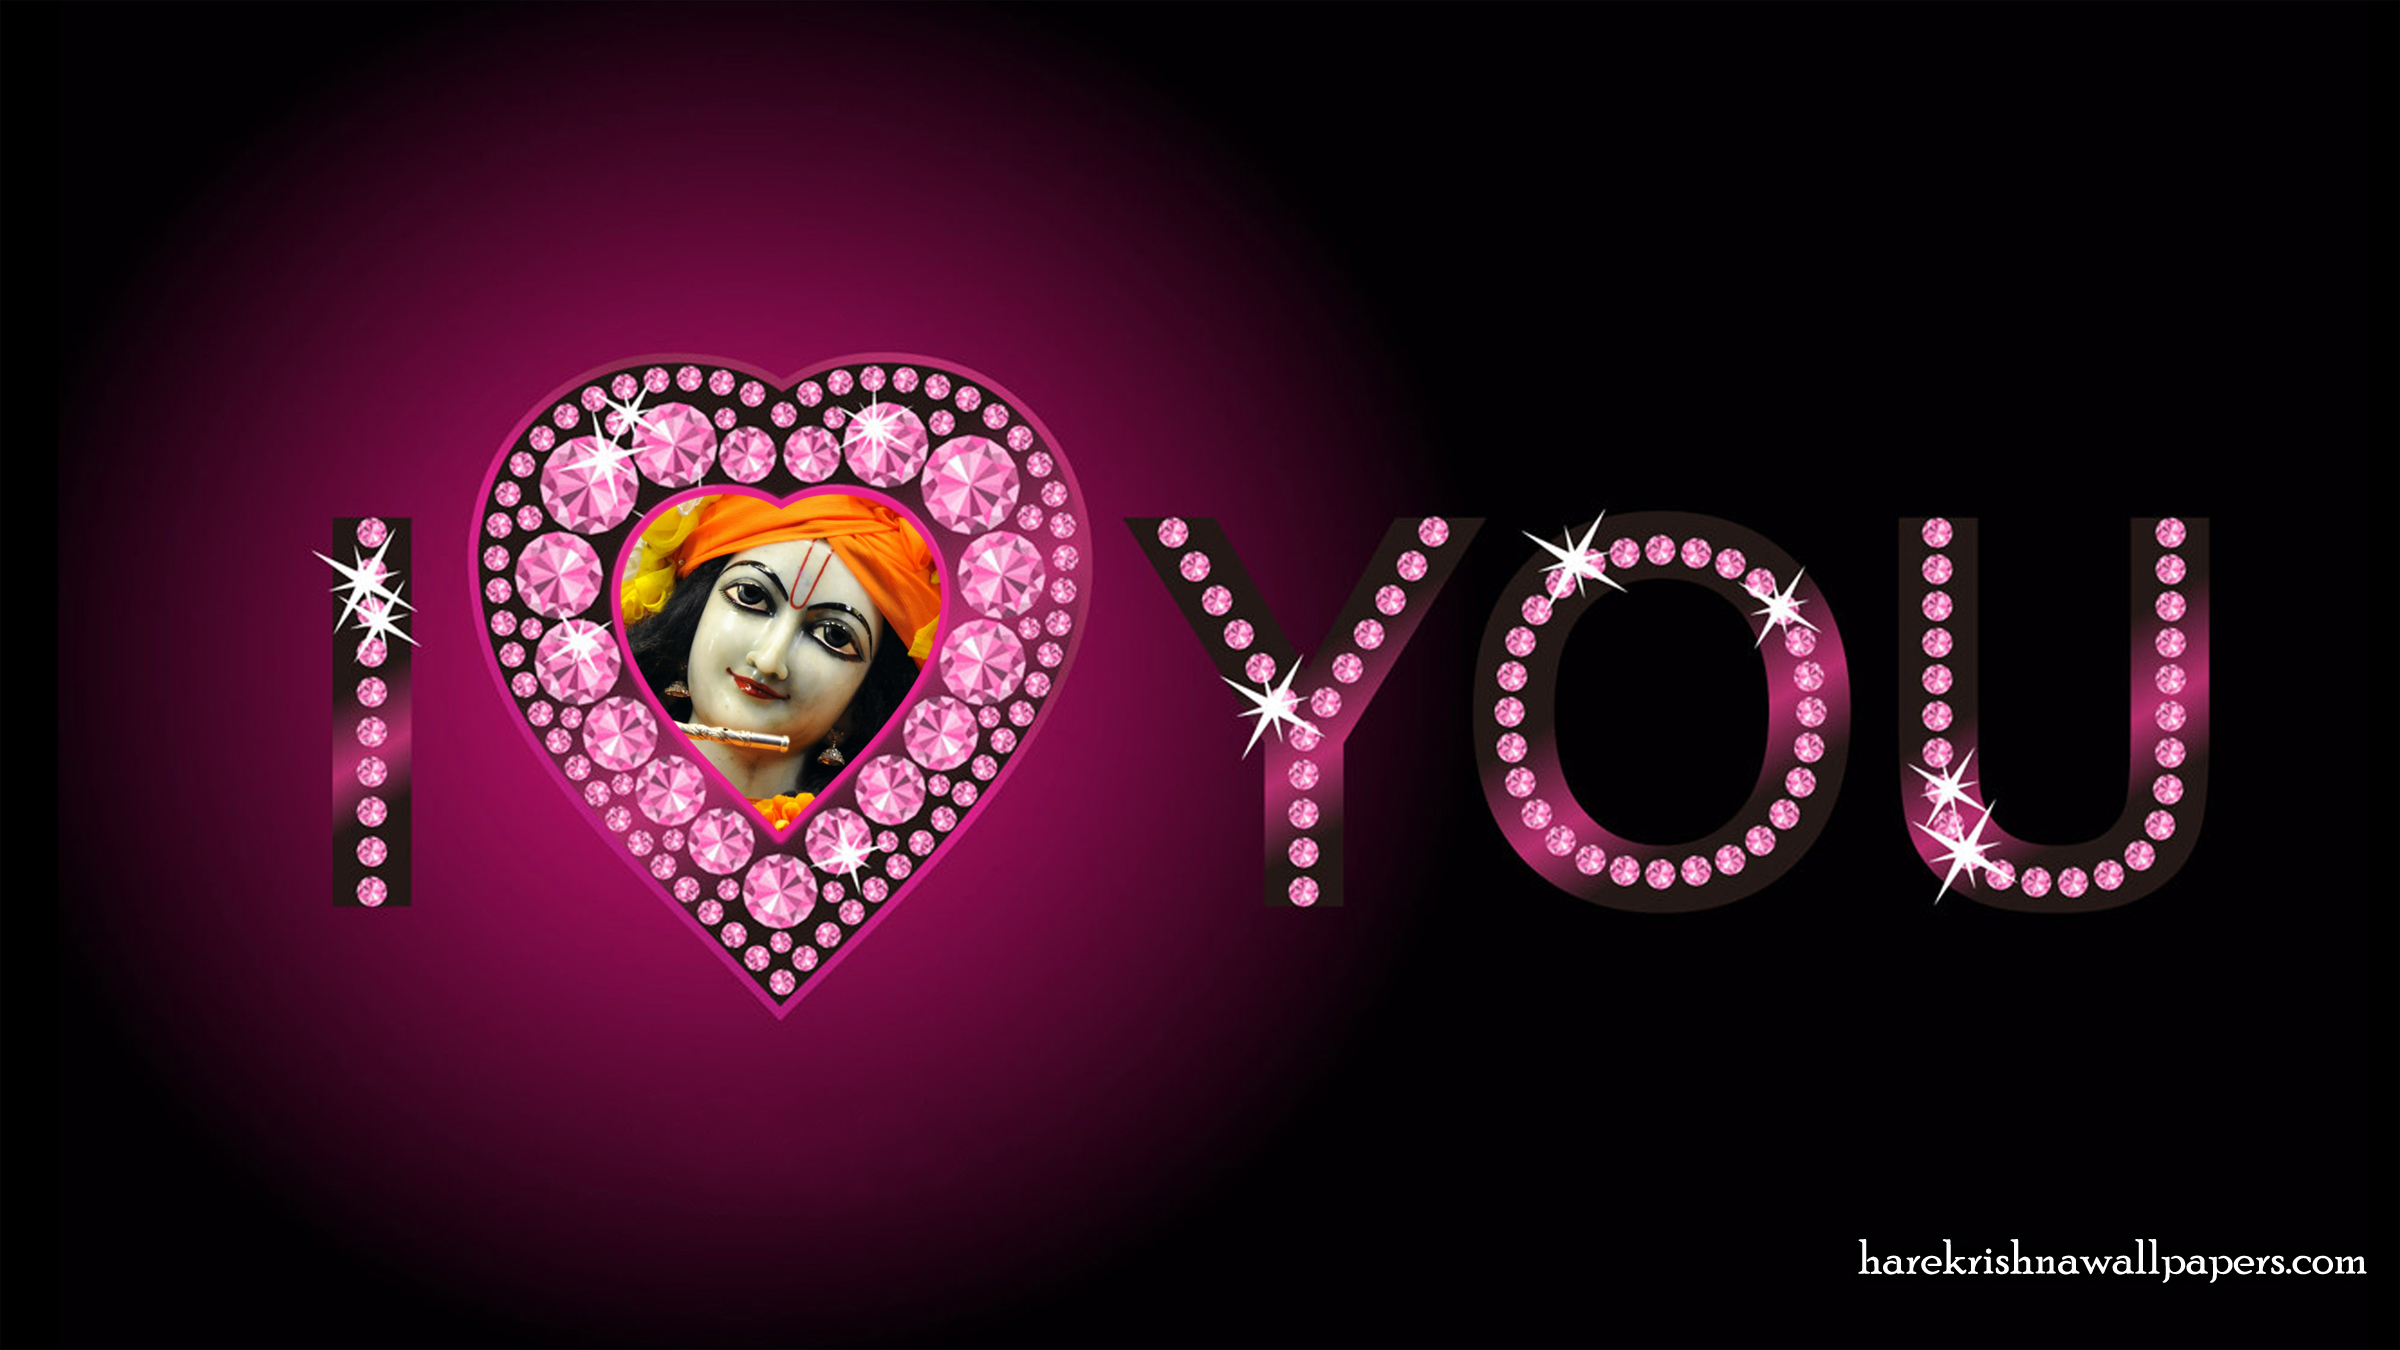 I Love You Gopinath Wallpaper (001) Size 2400x1350 Download